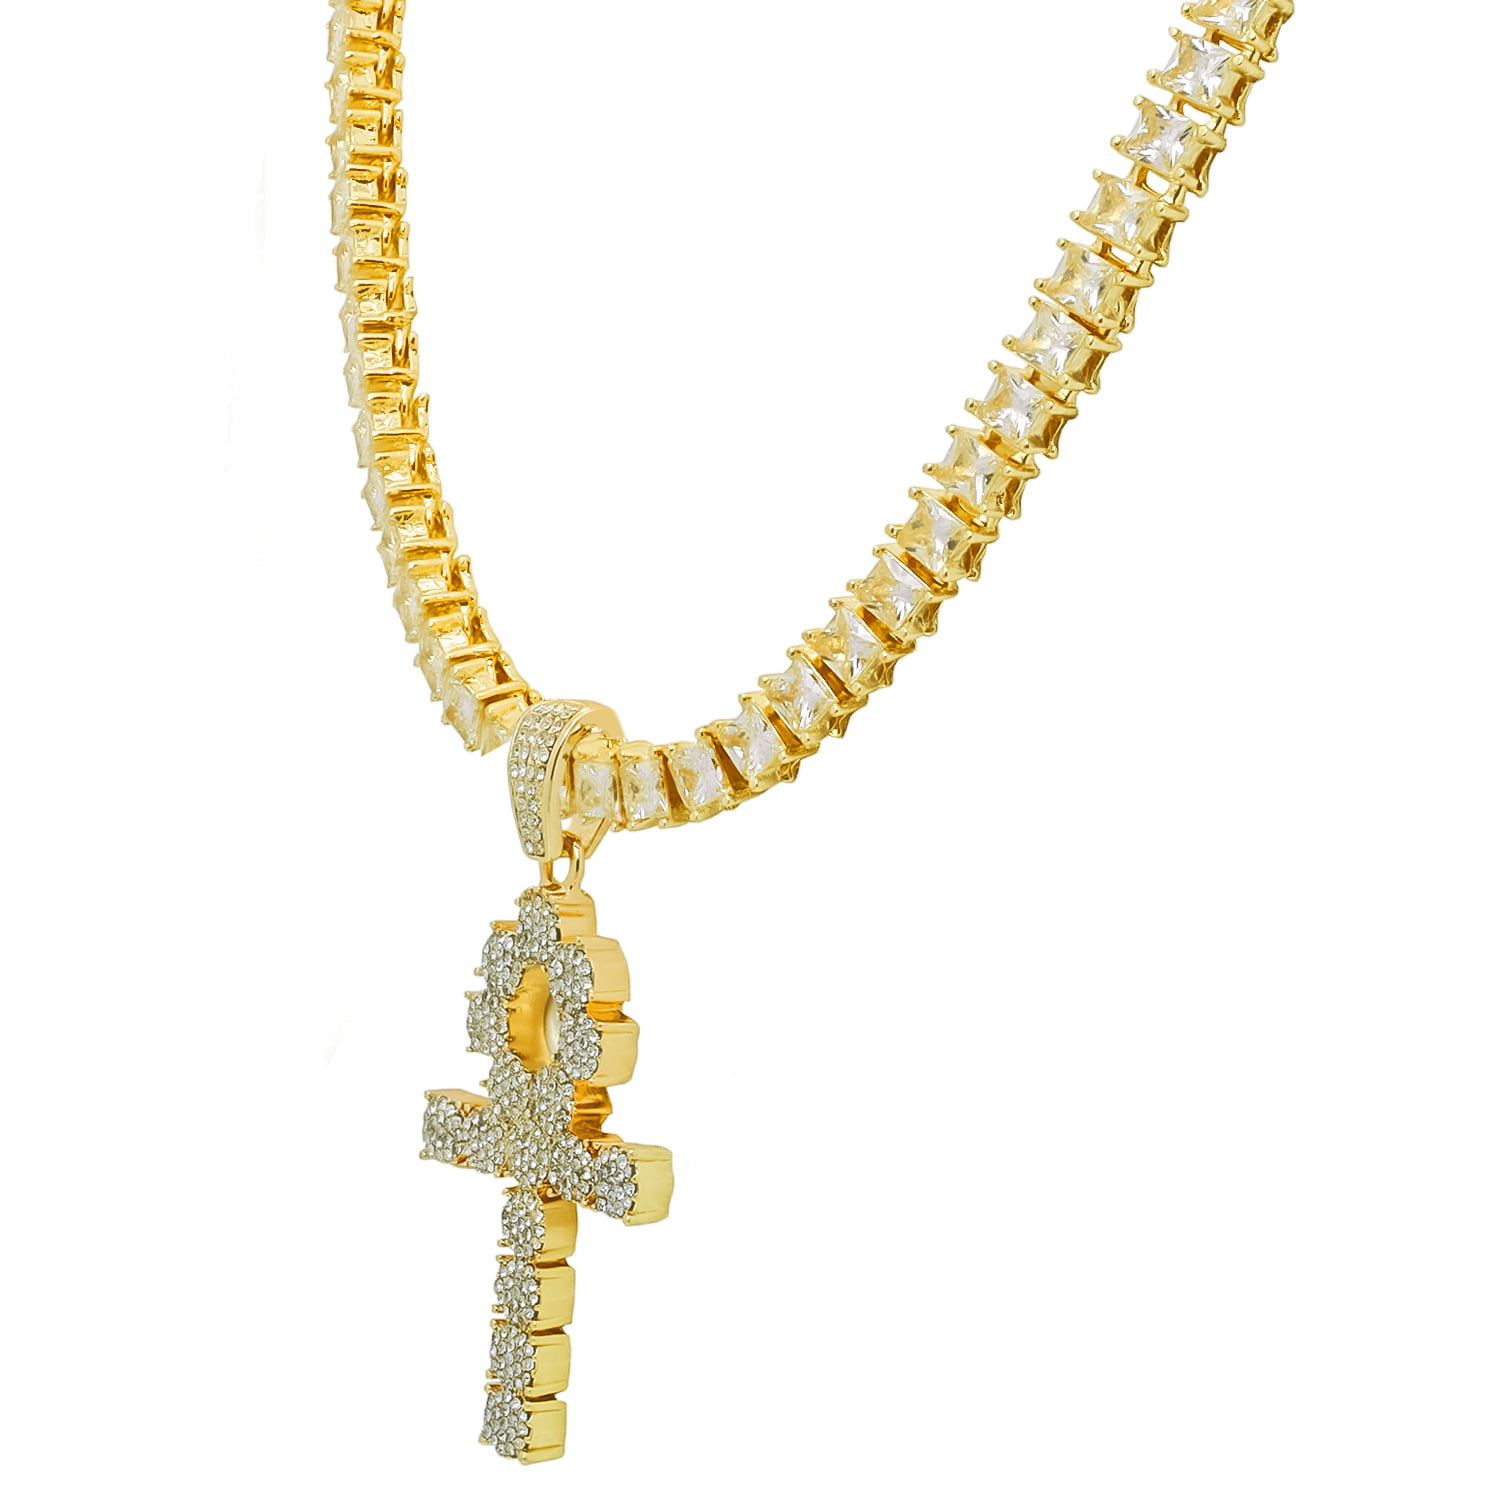 Yellow Gold-Tone Iced Out Hip Hop Bling Symbol Of Life Ankh Cross Pendant 1 Row Square Cubic Zirconia Princess Cut Stones Tennis Chain 18 Necklace Choker Chain